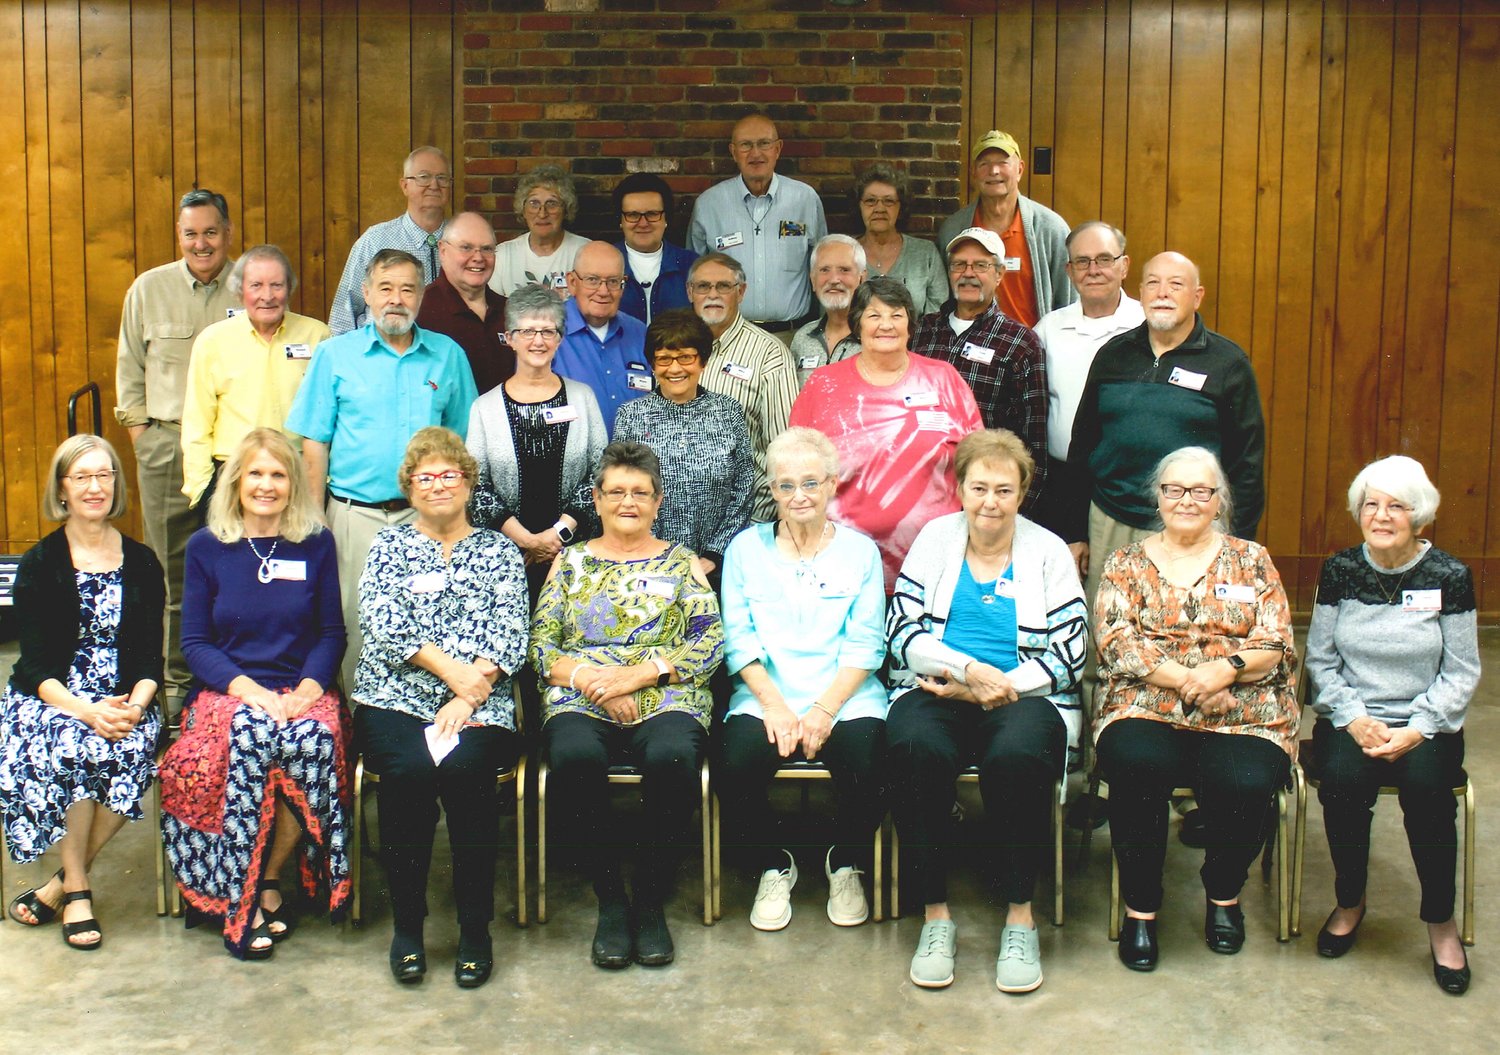 The Moberly High School Class of 1967 poses for a photo during its 55th reunion in October. Front row, from left, are Carol Sittler Benyi, Bonnie Int Veld Rose, Peggy Graves Mead, Marilyn Switzer Esry, Connie Kribbs Morgan, Cammie Fuhrman Eravi, Marilyn Dixson Bishop, Karen Kraber Bowman. Second row, Ron Shoaf, Janice Slaughter Fohn, Linda Thomas Ballinger, Sherry Johnson Chase, Jack Curry. Row 3, Richard Littrell, Barry Davidson, Wayne Osborne, Mike Stansel, Don Burrus, Tom Ballew, Tom Jackson. Back row, Mike Lynch, Larrie Roberts, Joyce Creed Nelson, Pat Flood Ross, Aubrey Van Houten, Connie Griggs Foster, Phil Crandall.